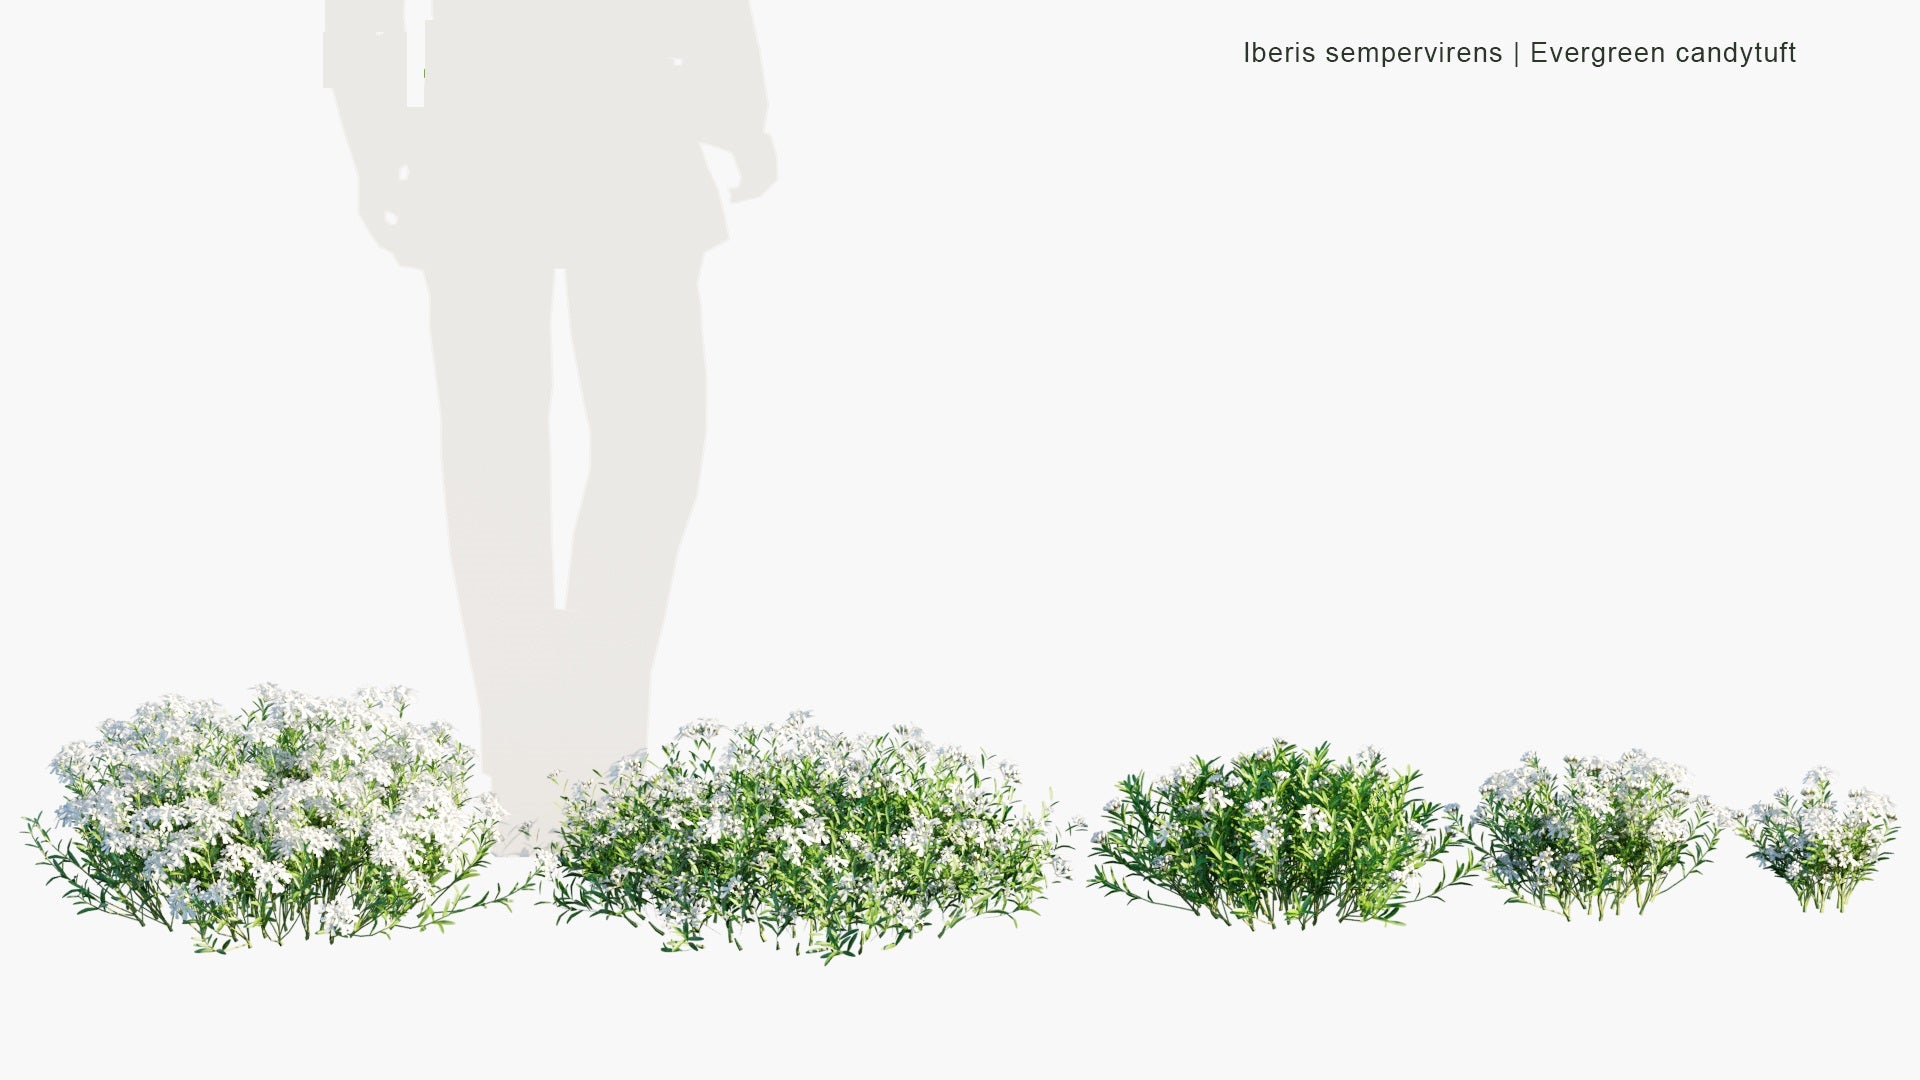 Low Poly Iberis Sempervirens - Evergreen Candytuft, Perennial Candytuft (3D Model)